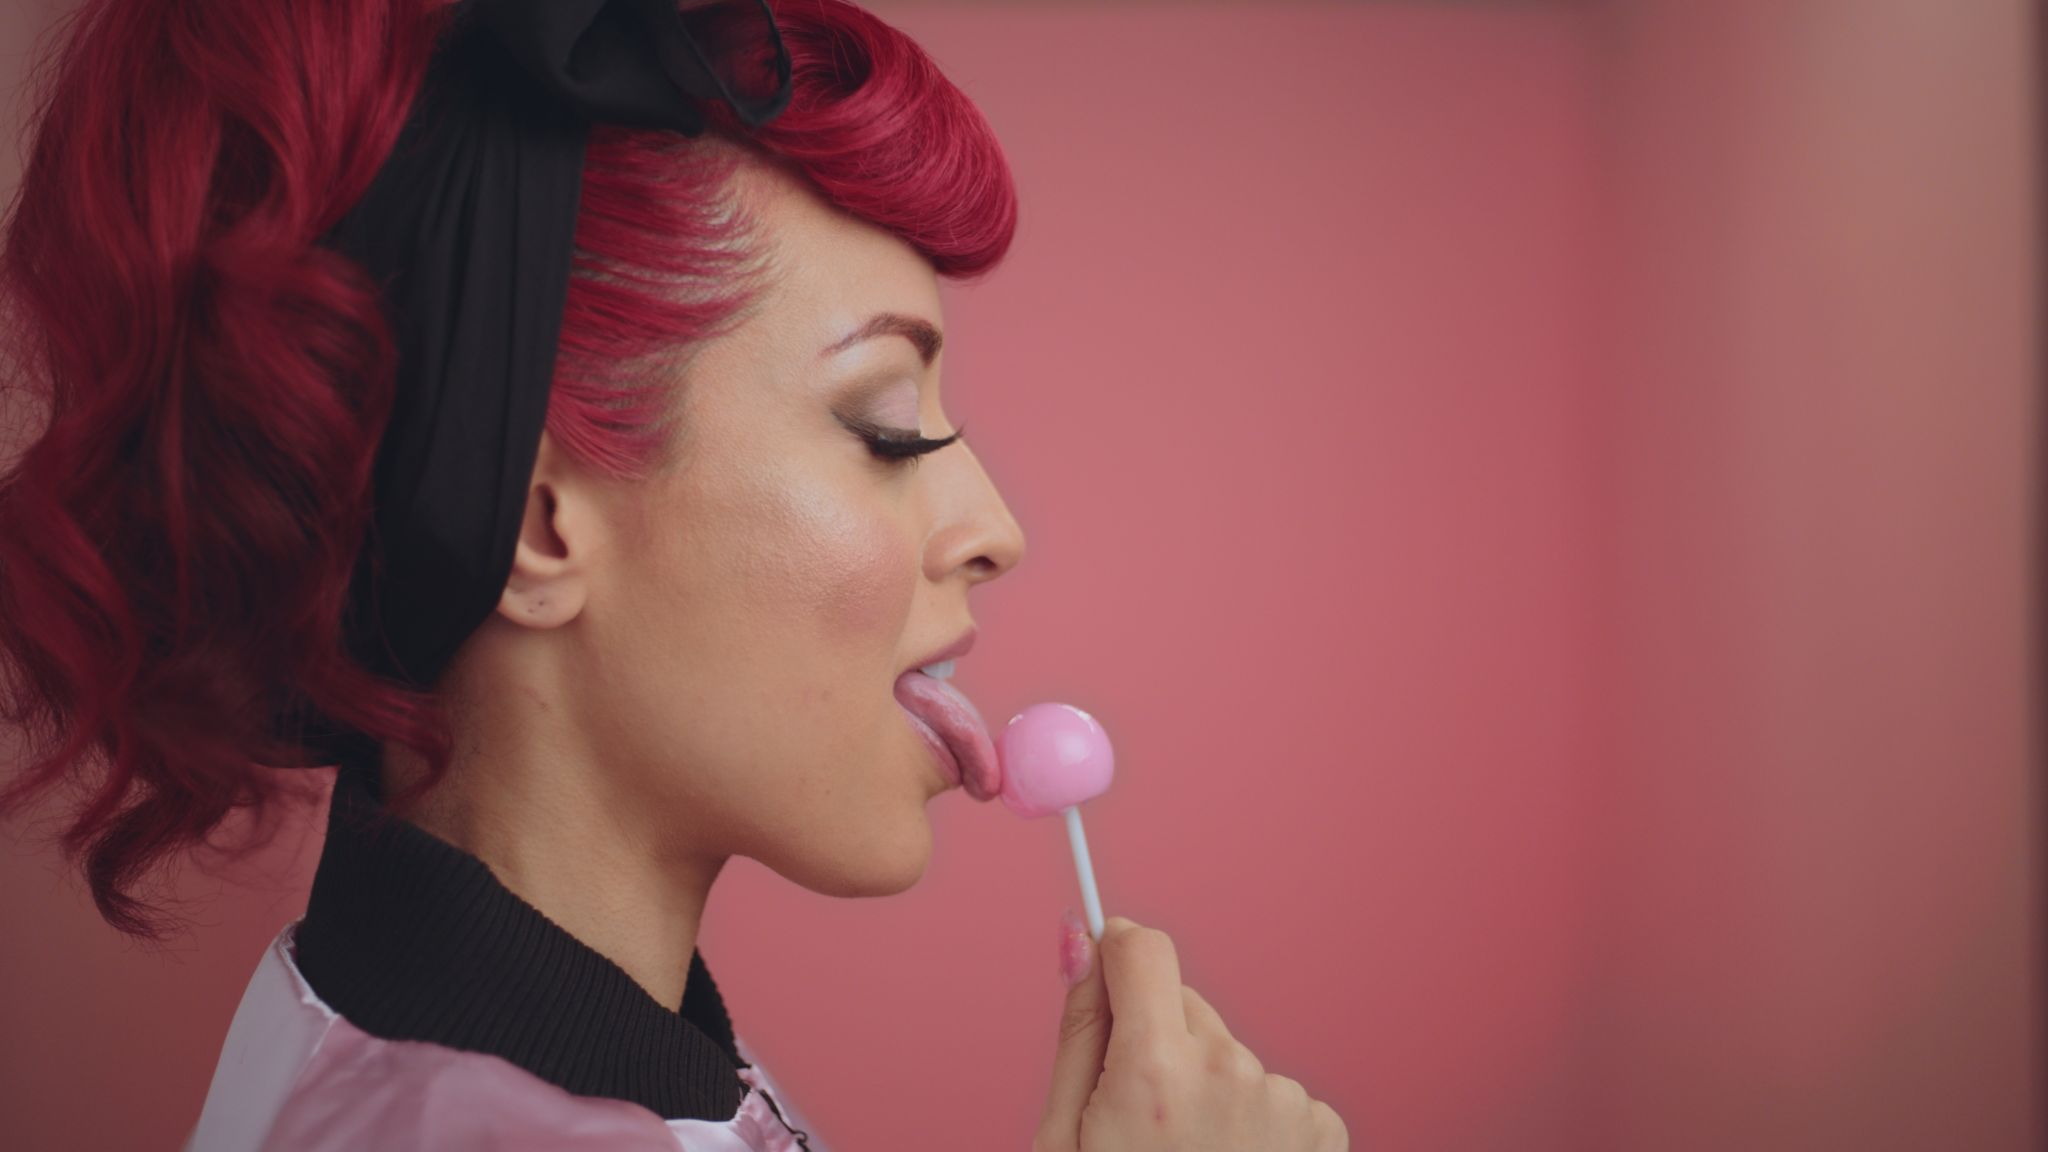 Pretty Vulgar Side view of Marielle with red hair licking a pink lollypop with eyes closed